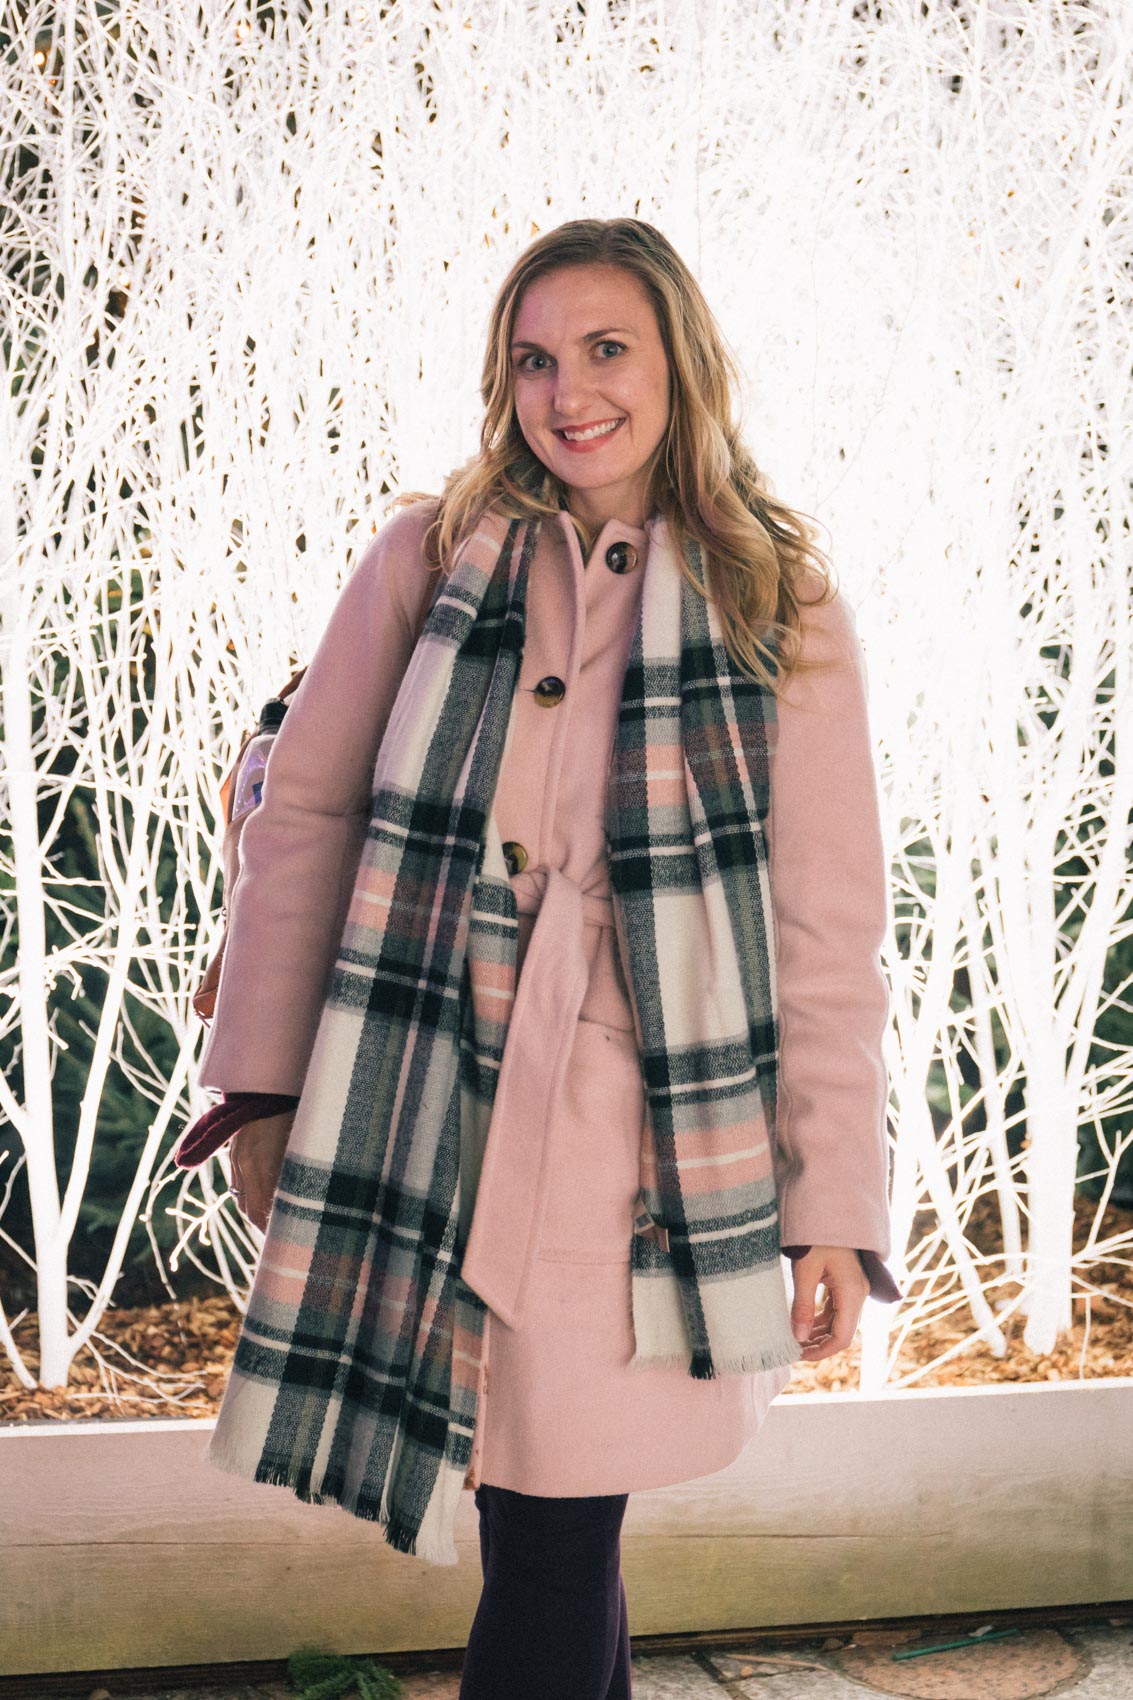 Styling a blush pink coat in the winter. 